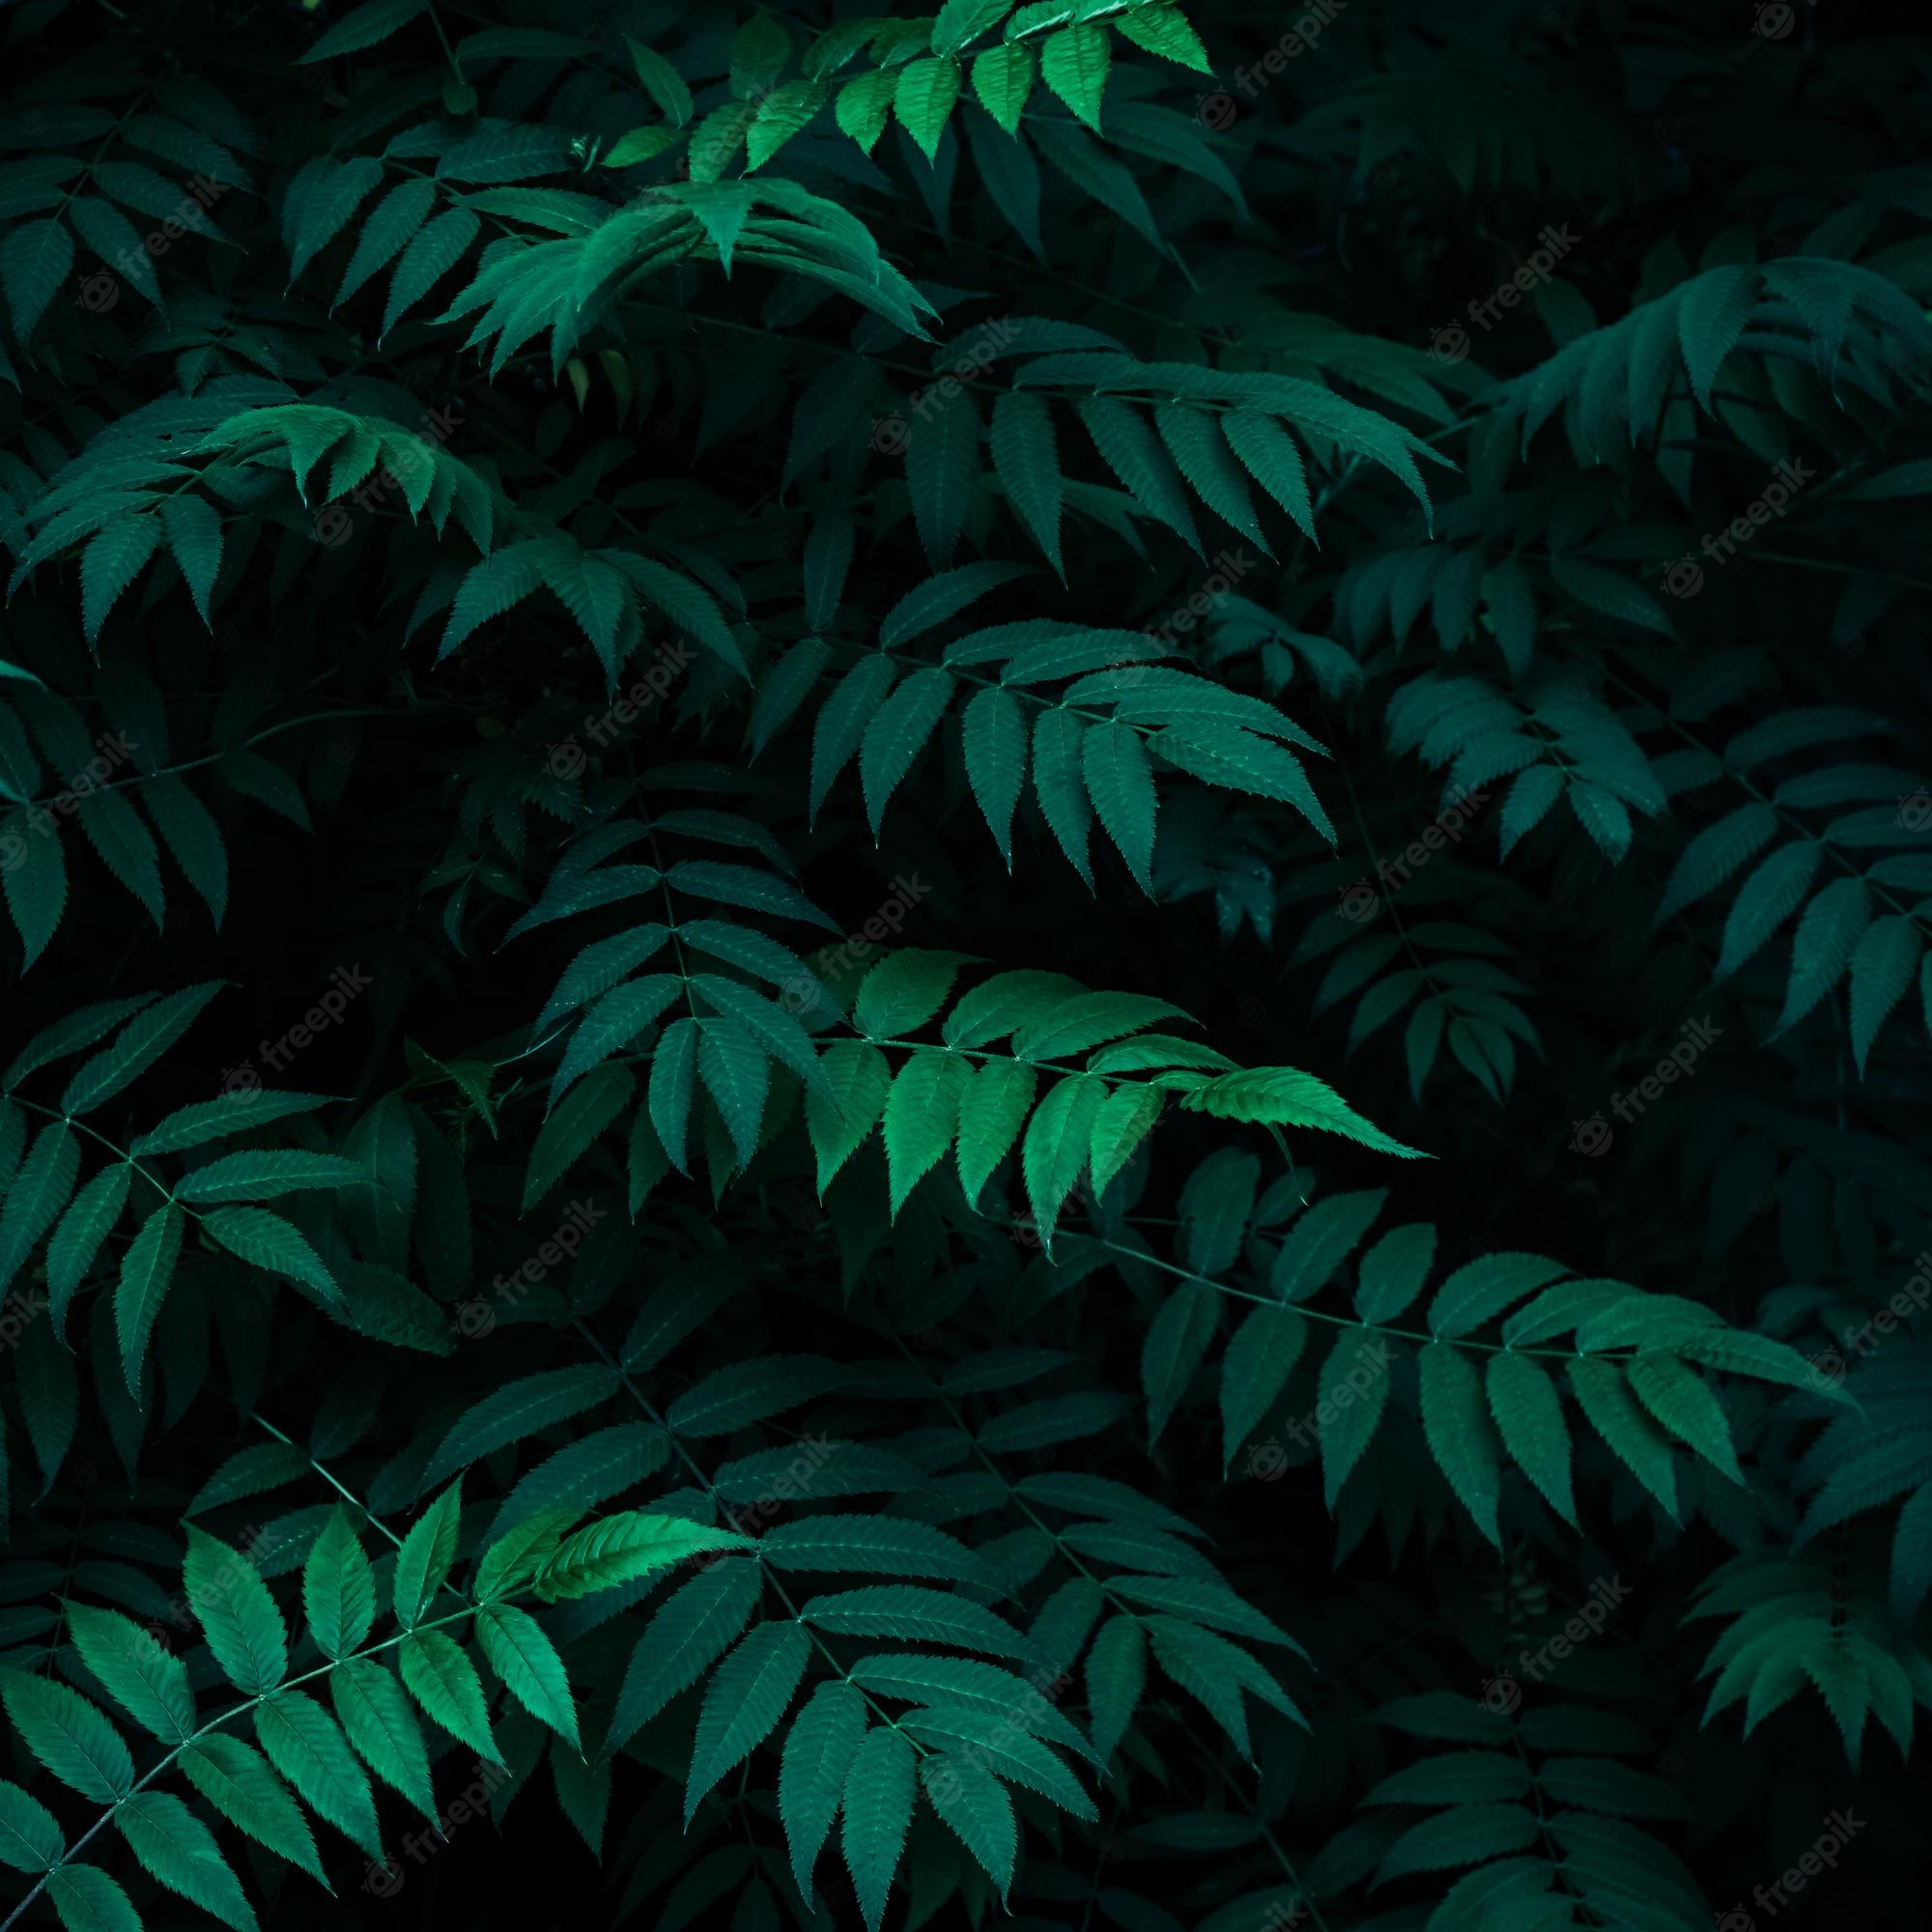 Premium Photo. Green leaves pattern summer natural plant background wallpaper dark texture of fresh foliage in night greenery backdrop for design